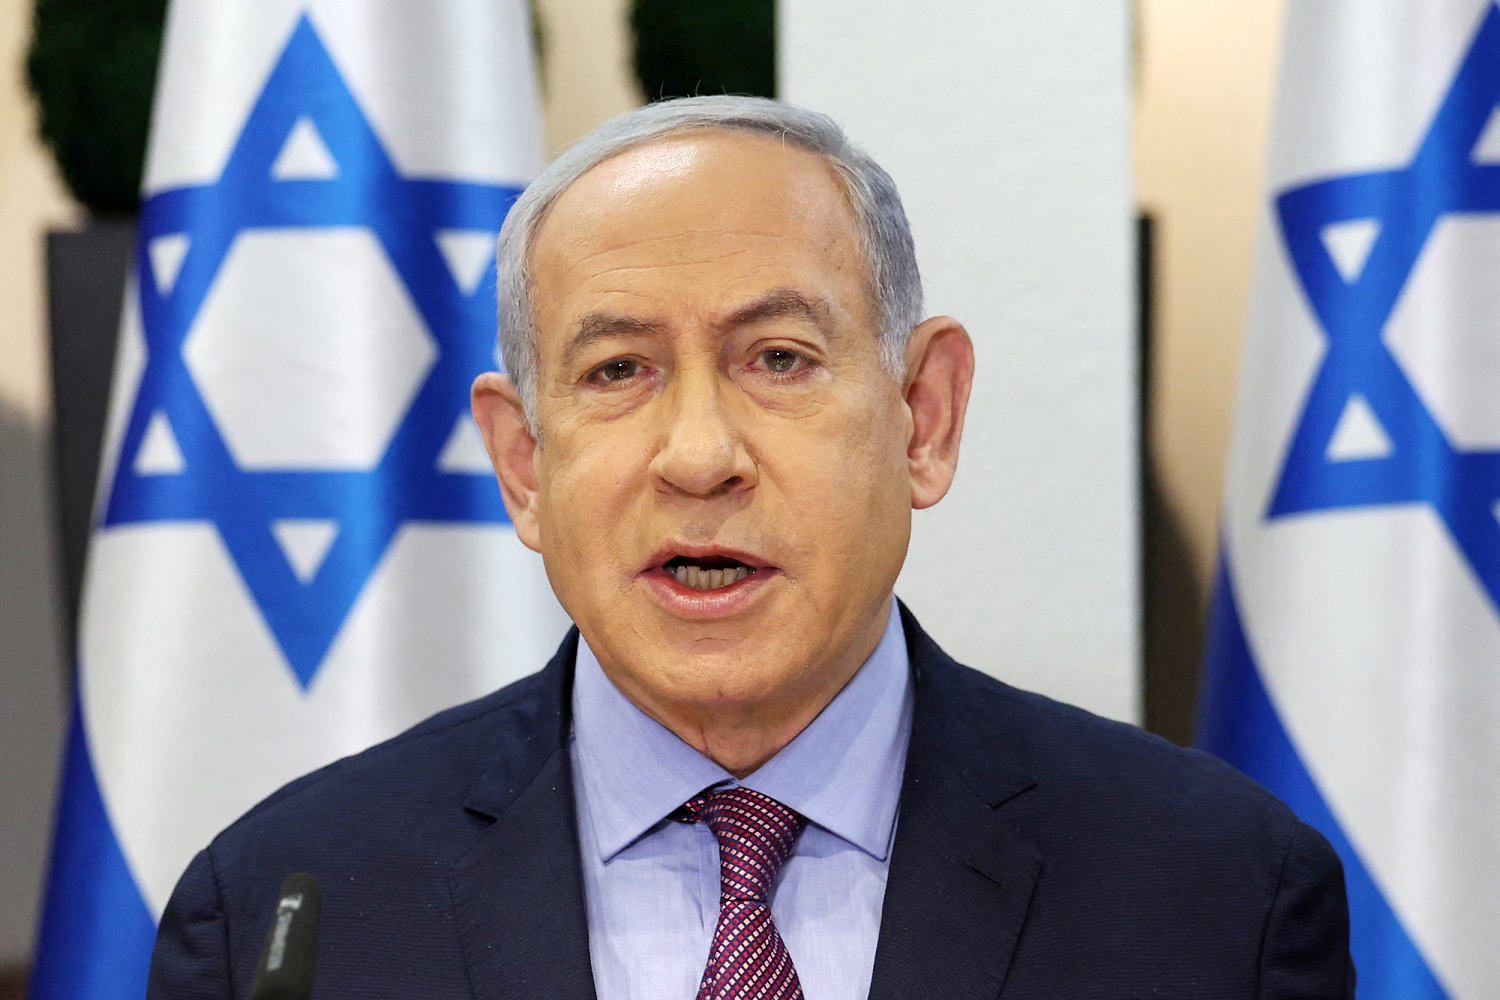 Why Netanyahu is cozying up to Republicans again